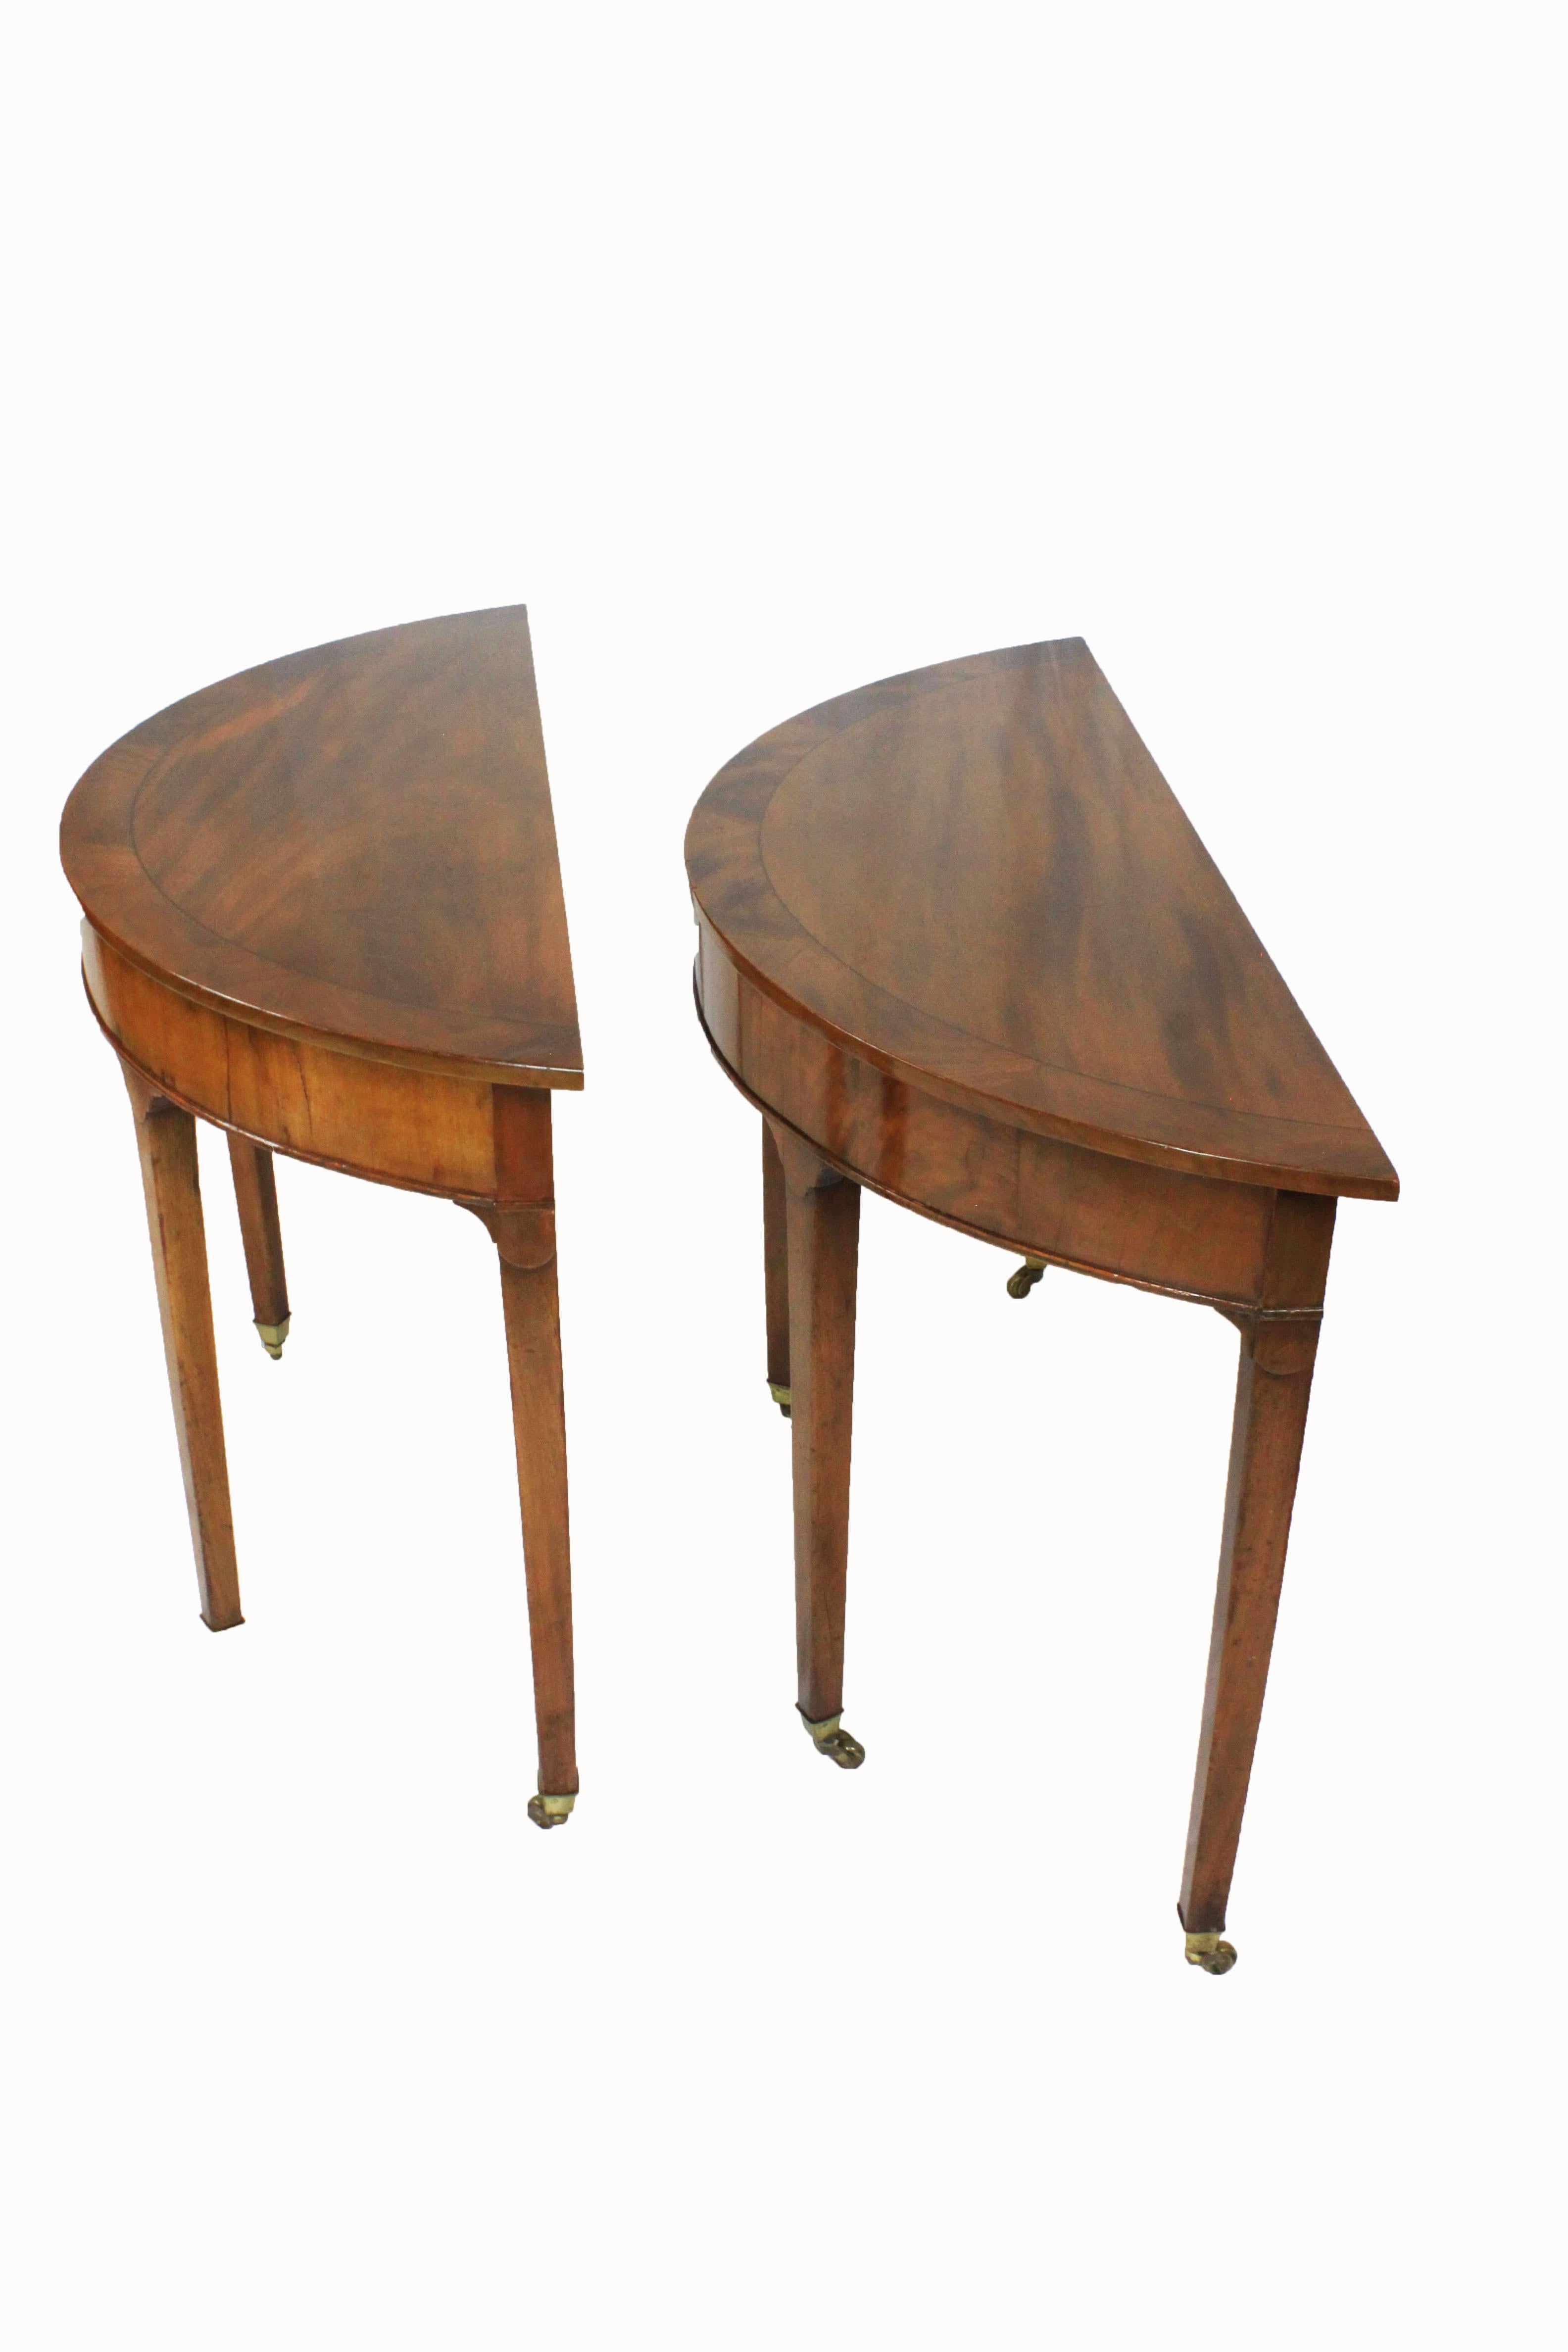 Matching pair of George III mahogany demilunes/consoles crossbanded in mahogany and standing on slender tapered legs terminating with brass castors. Warm patinated plum pudding mahogany tops with mahogany crossbanding.